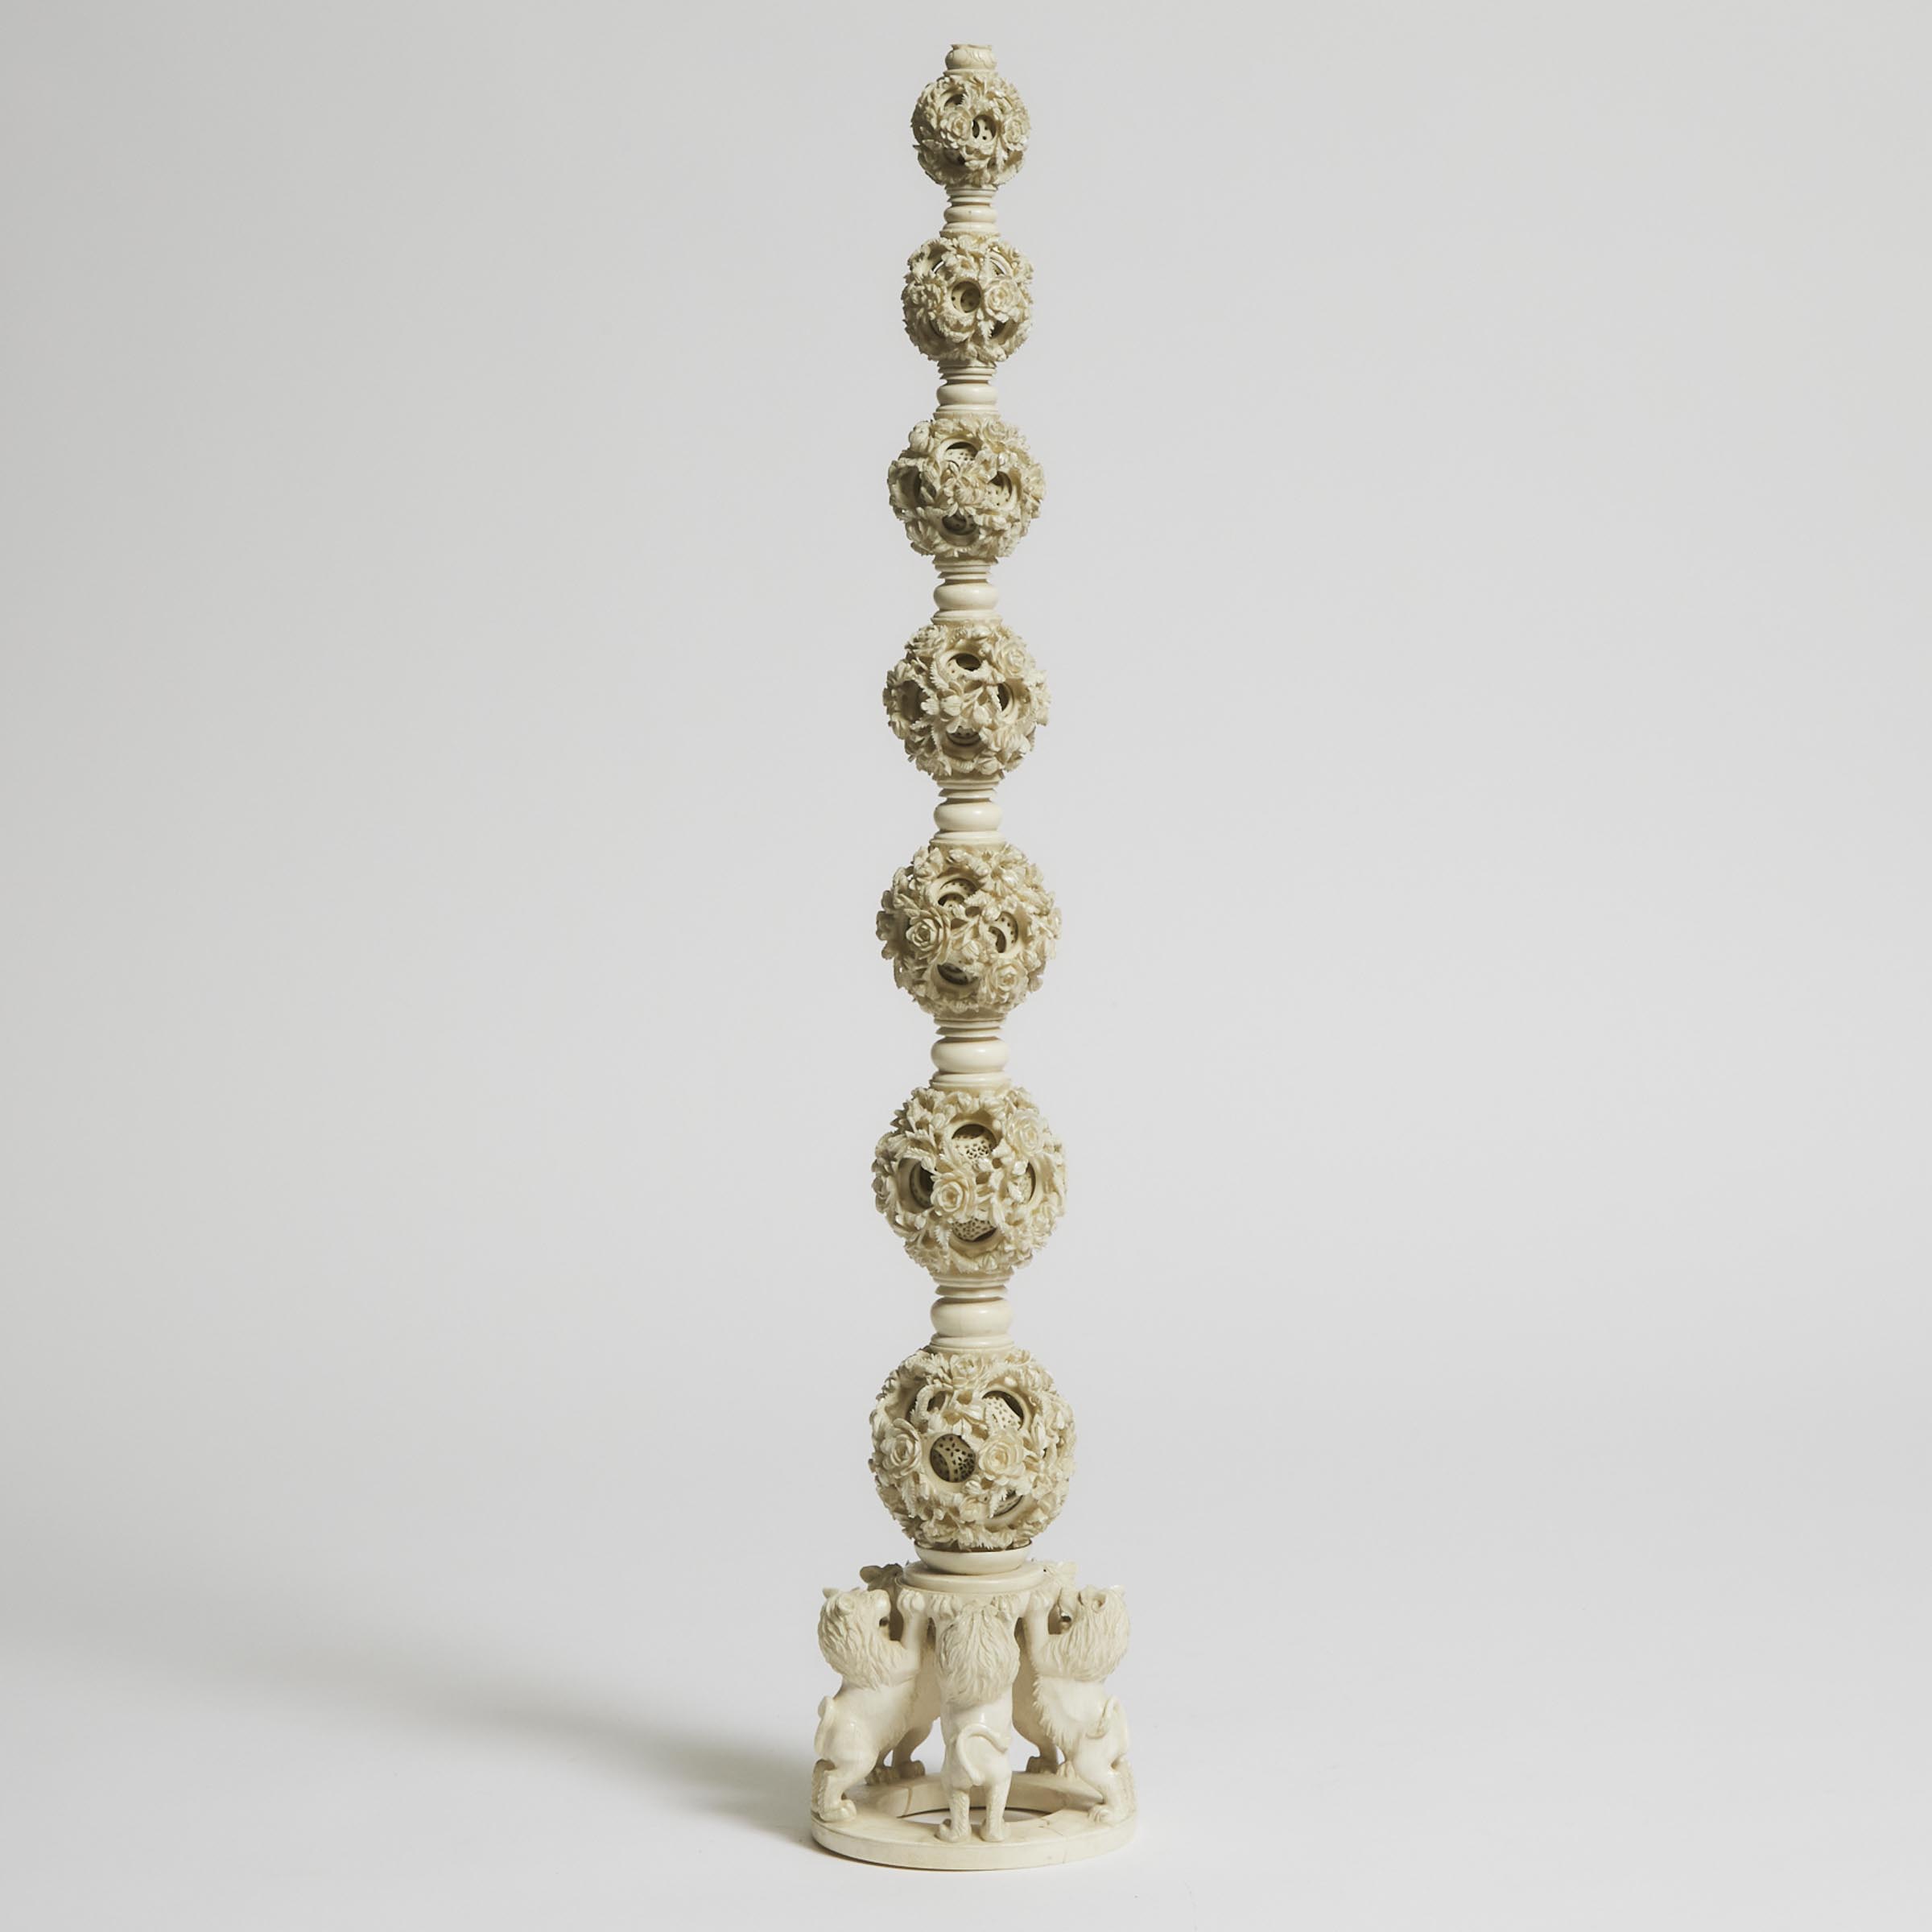 A Well-Carved Seven-Tiered Puzzle